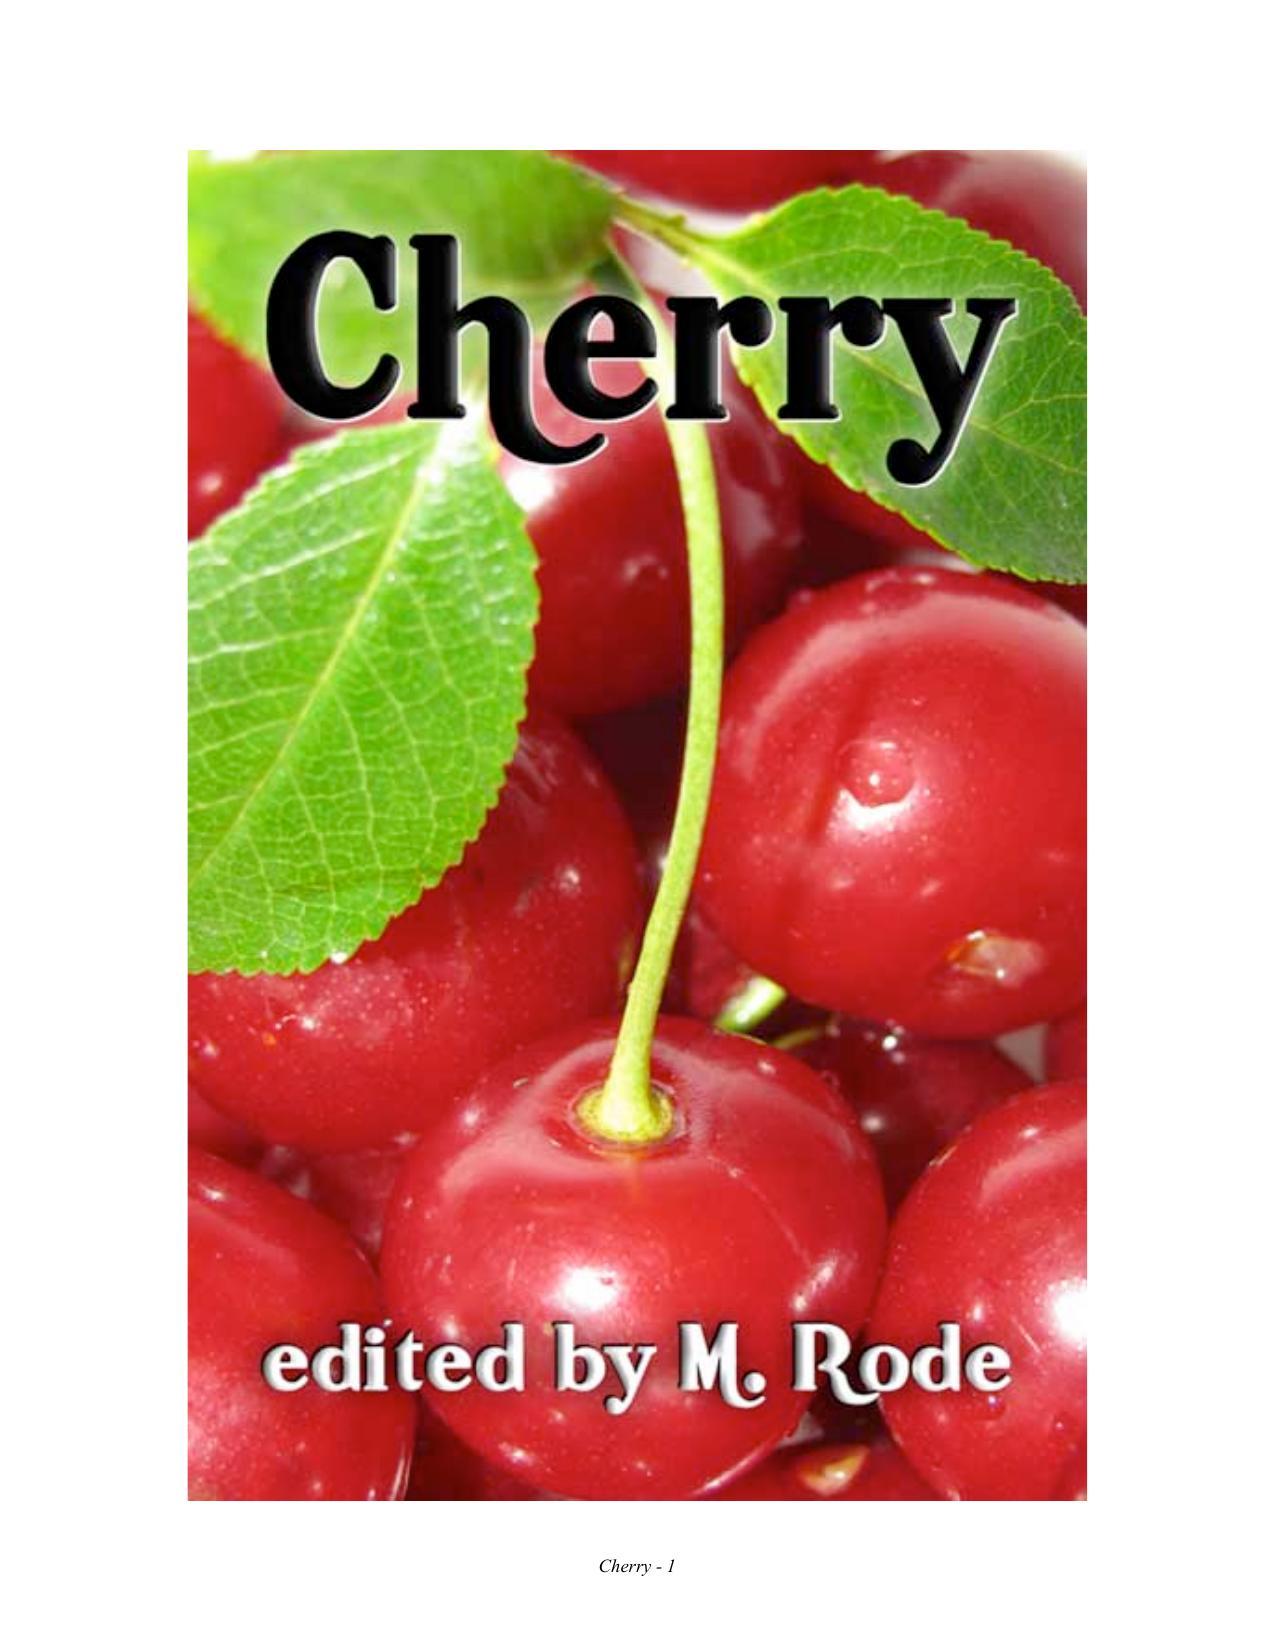 cherry by M. Rode